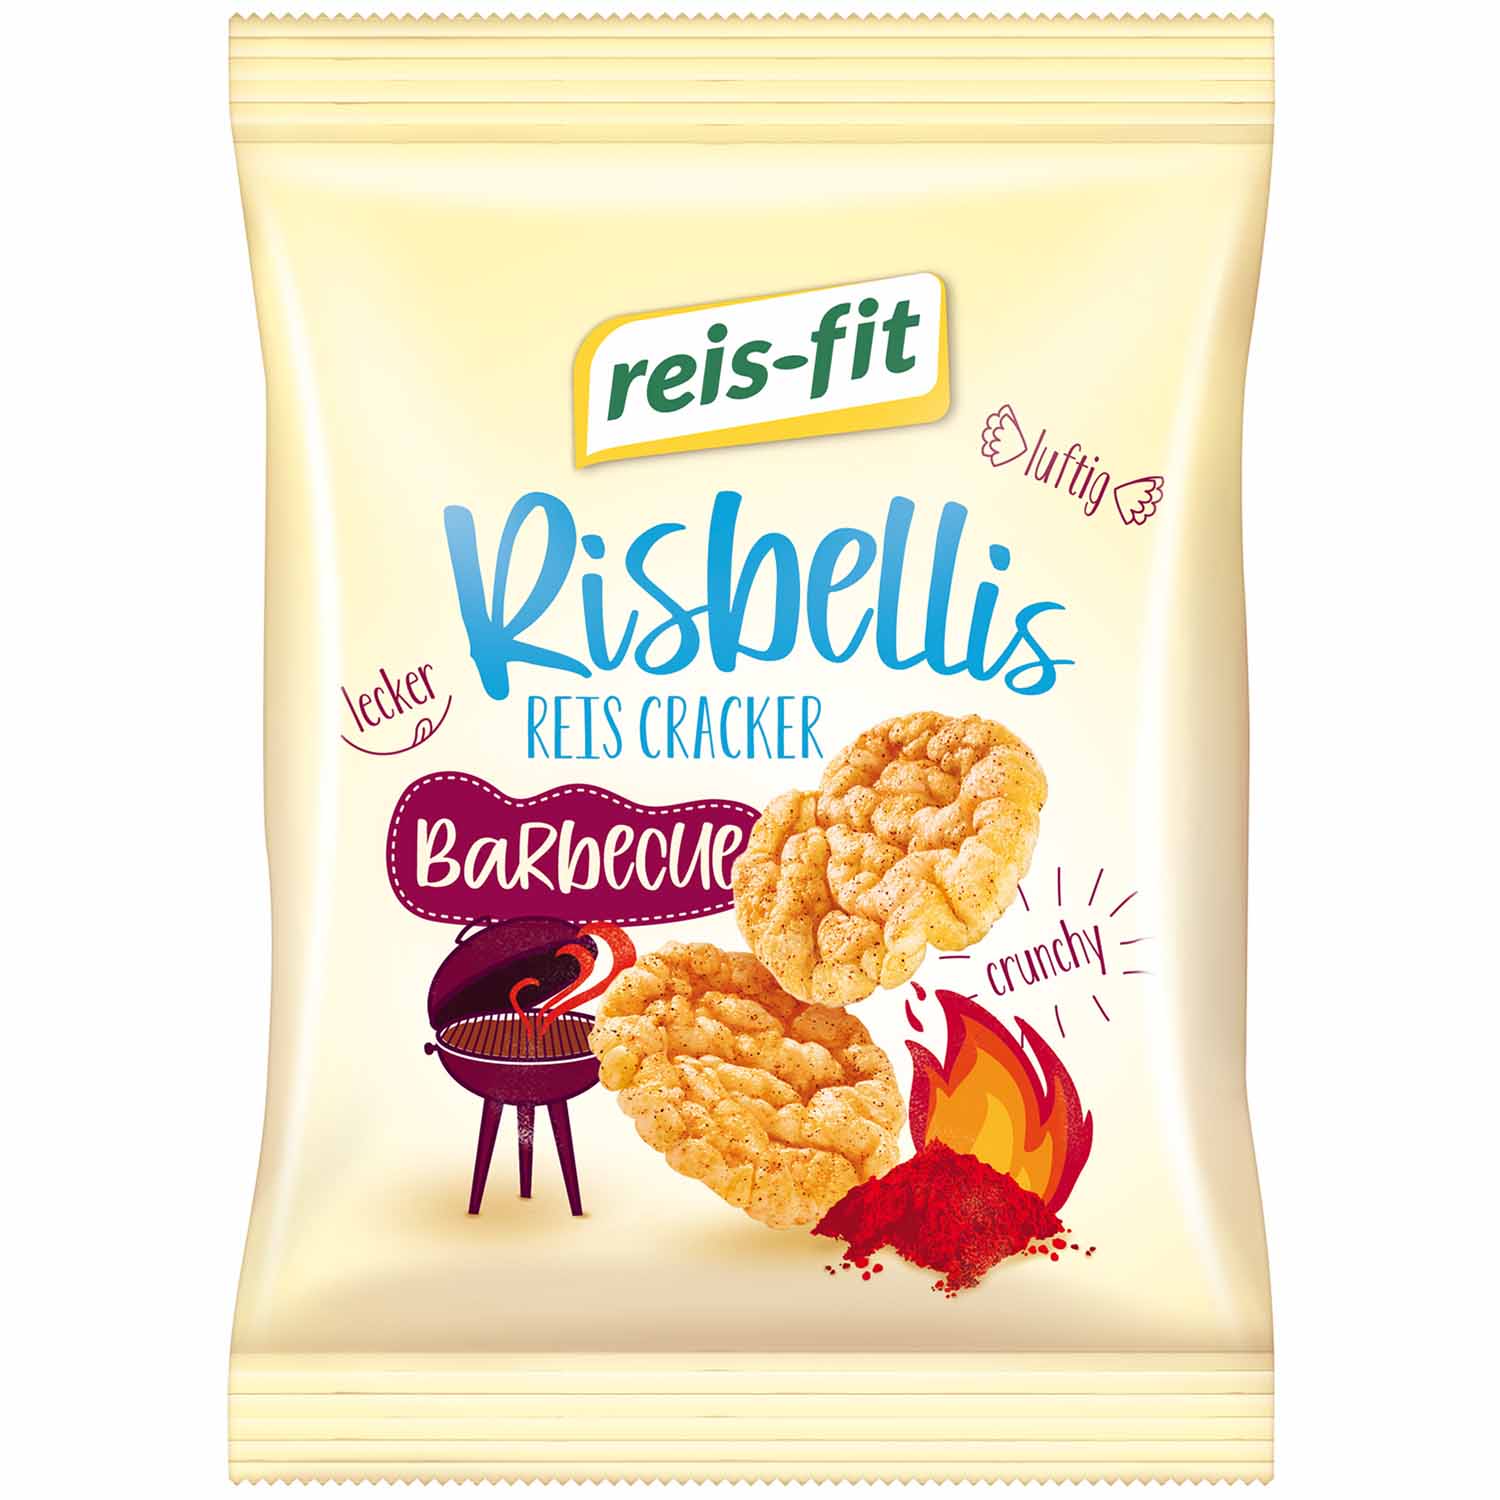 reis-fit Risbellis Barbecue 40g | Online kaufen im World of Sweets Shop